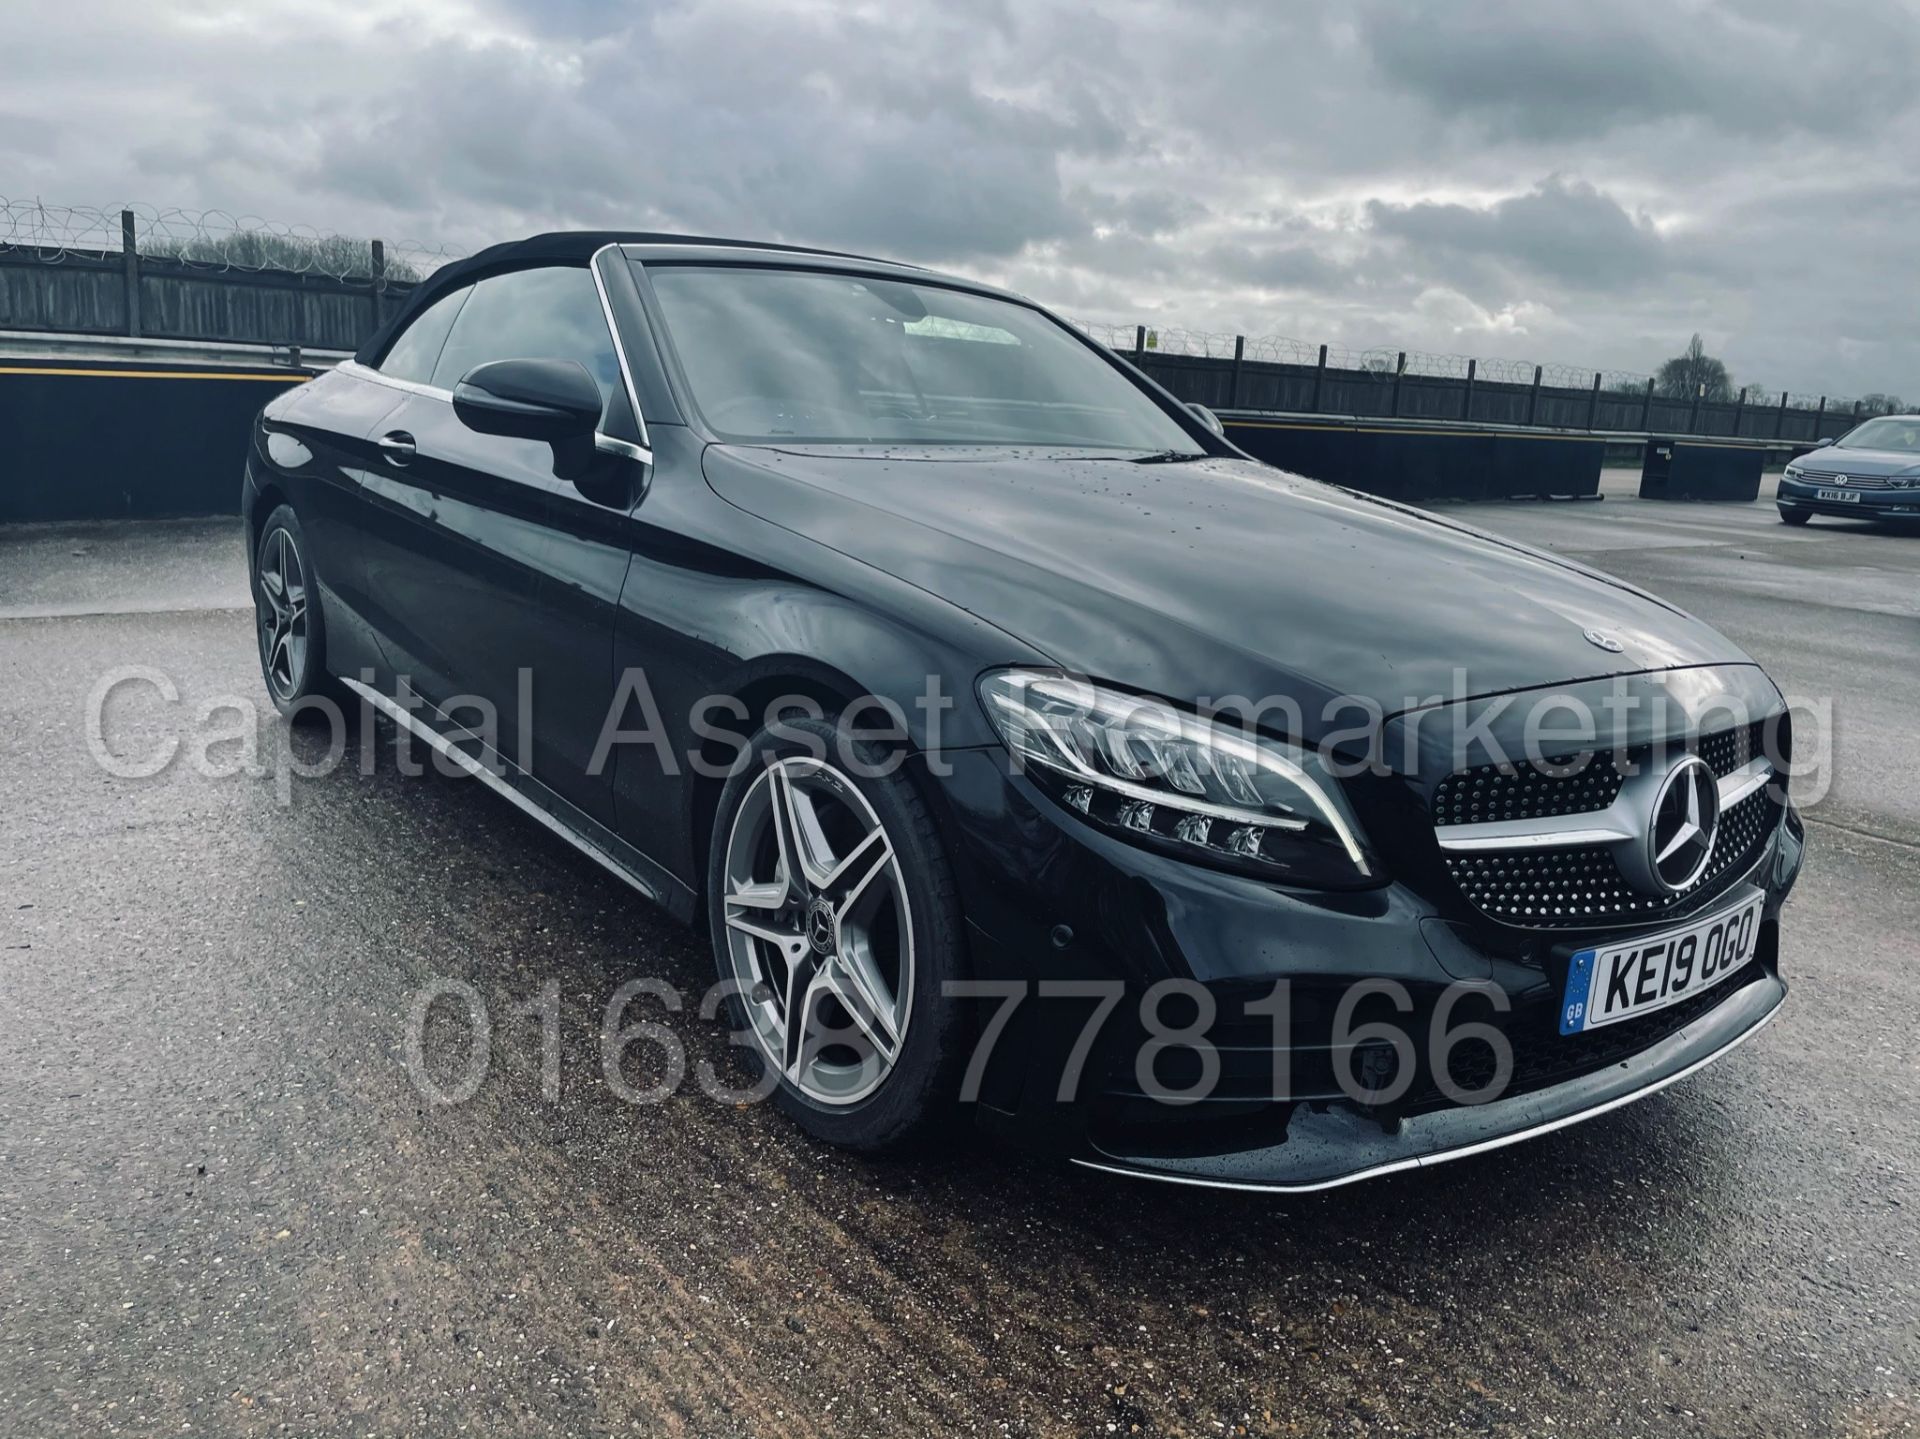 (ON SALE) MERCEDES-BENZ C220D *AMG LINE - CABRIOLET* (2019) '9G TRONIC AUTO - LEATHER - SAT NAV' - Image 26 of 56